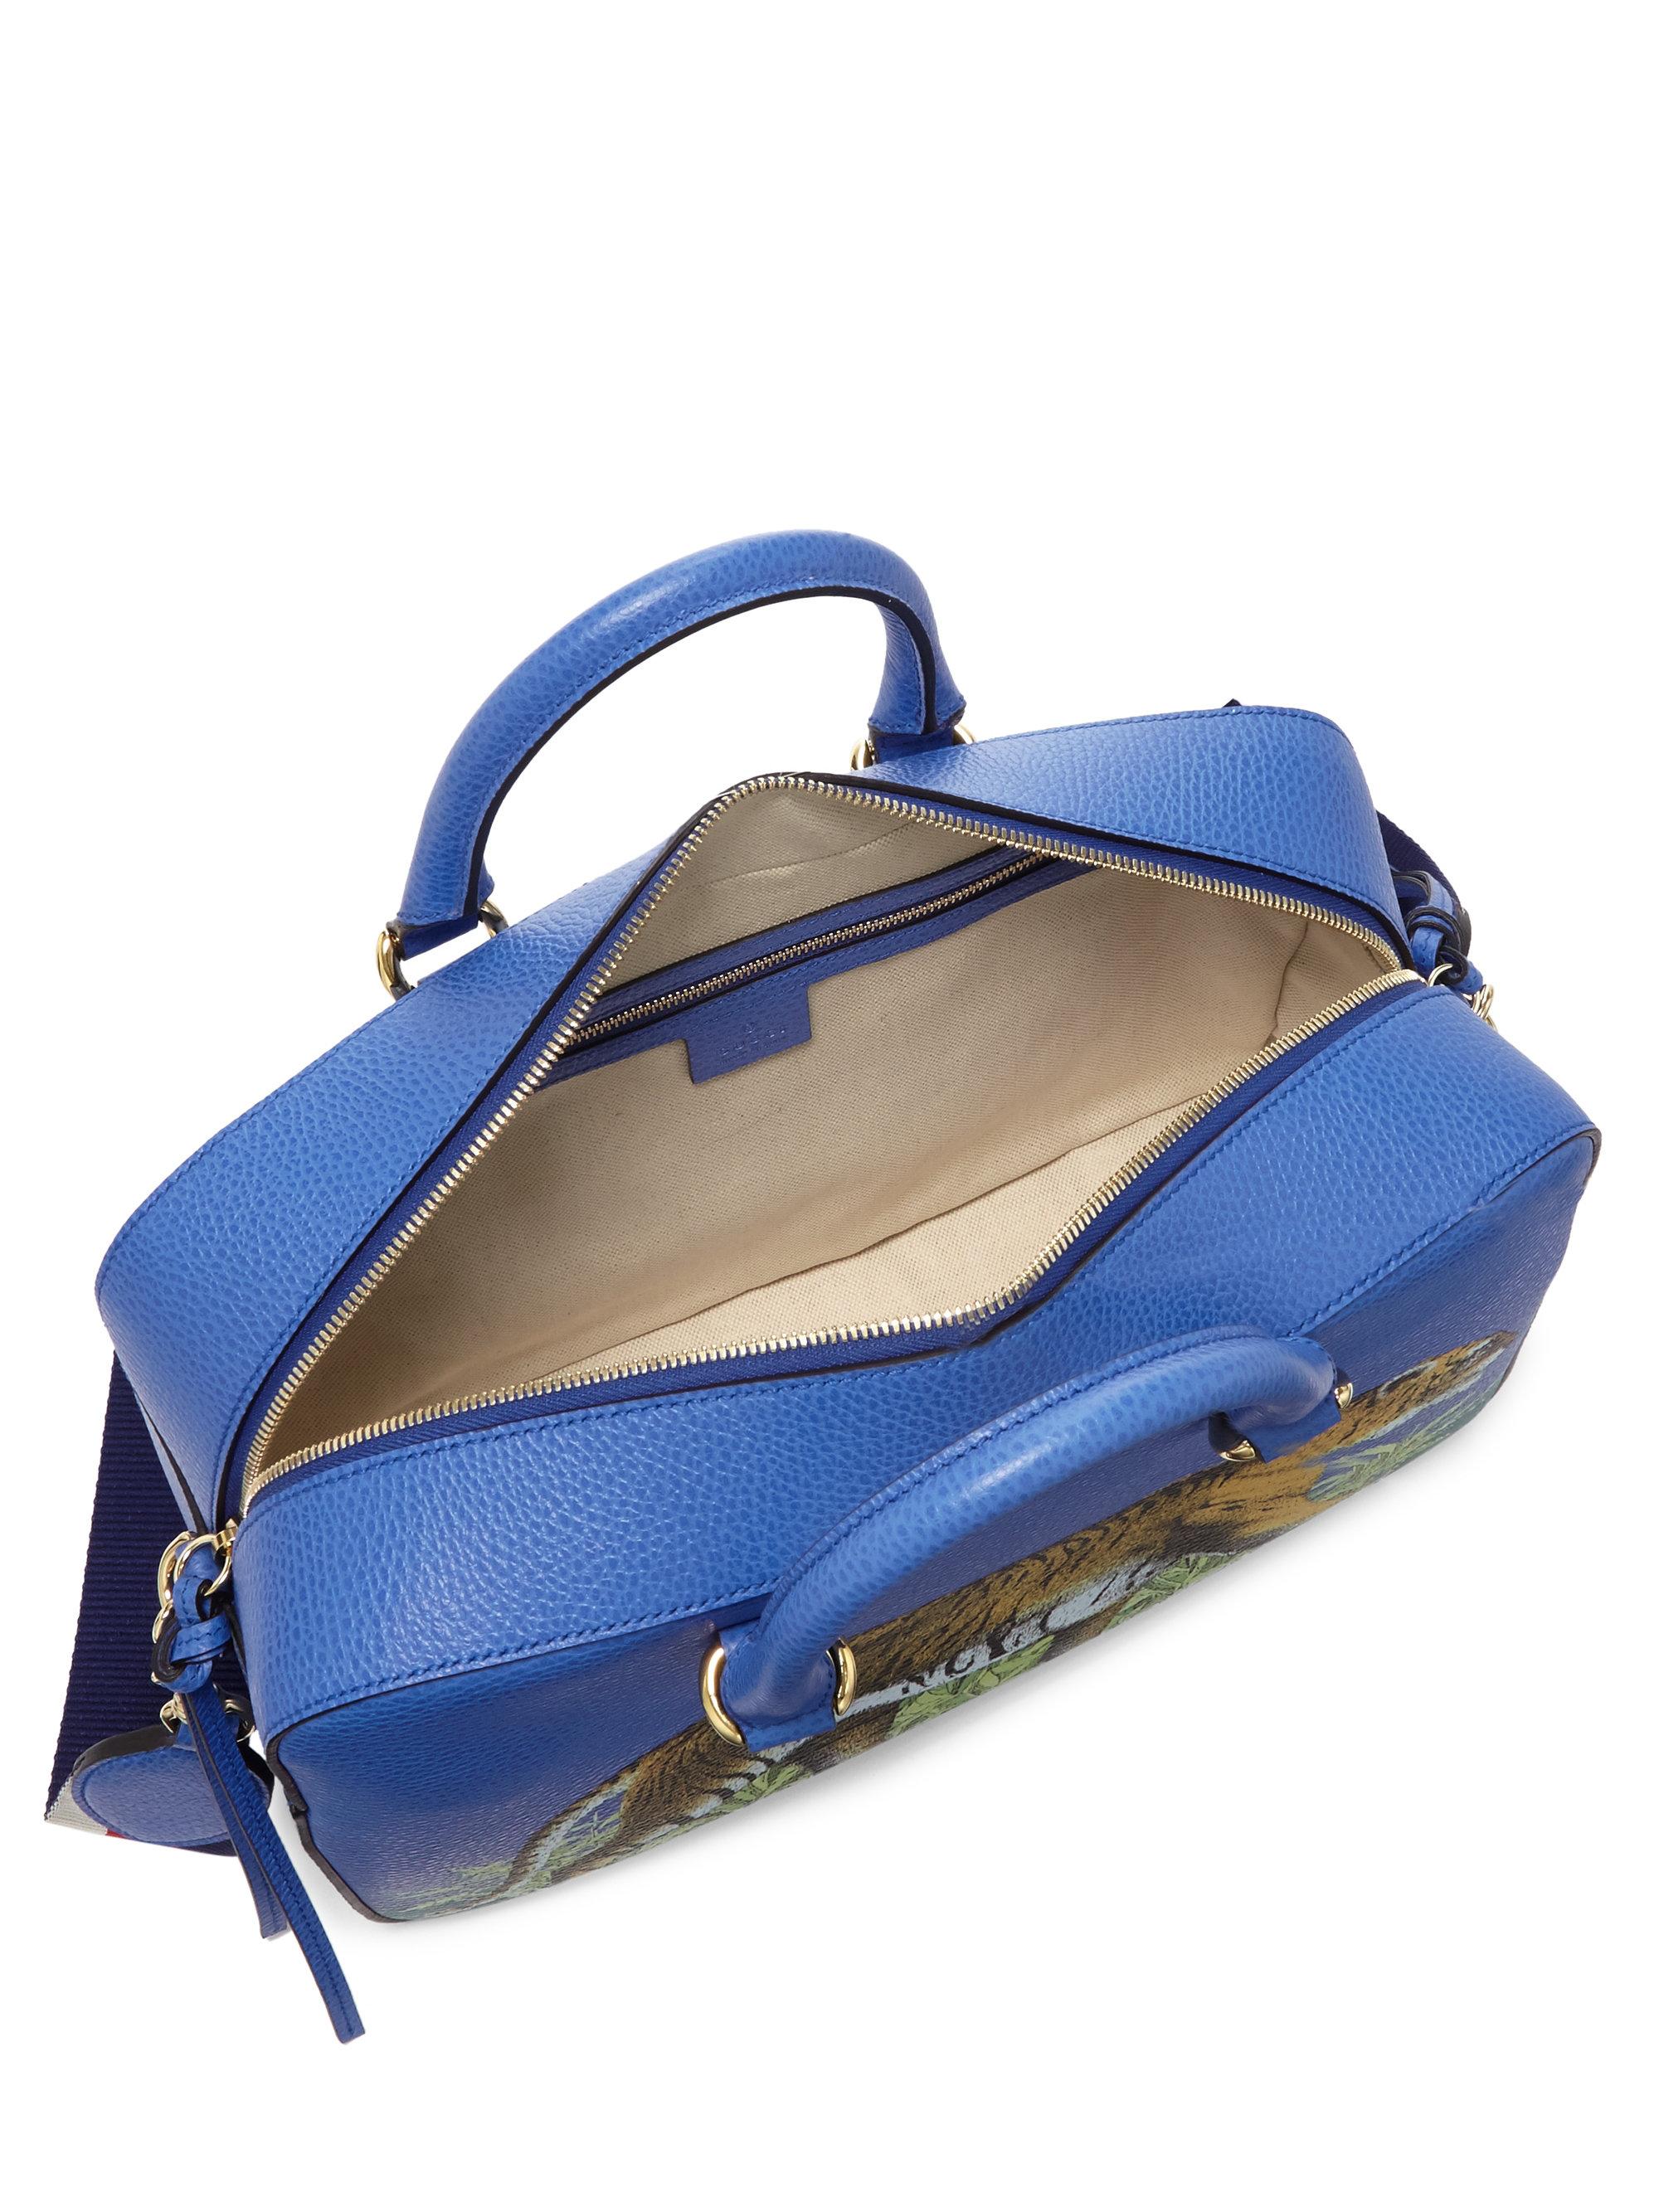 Gucci Tiger-print Leather Top-handle Bag in Blue - Lyst